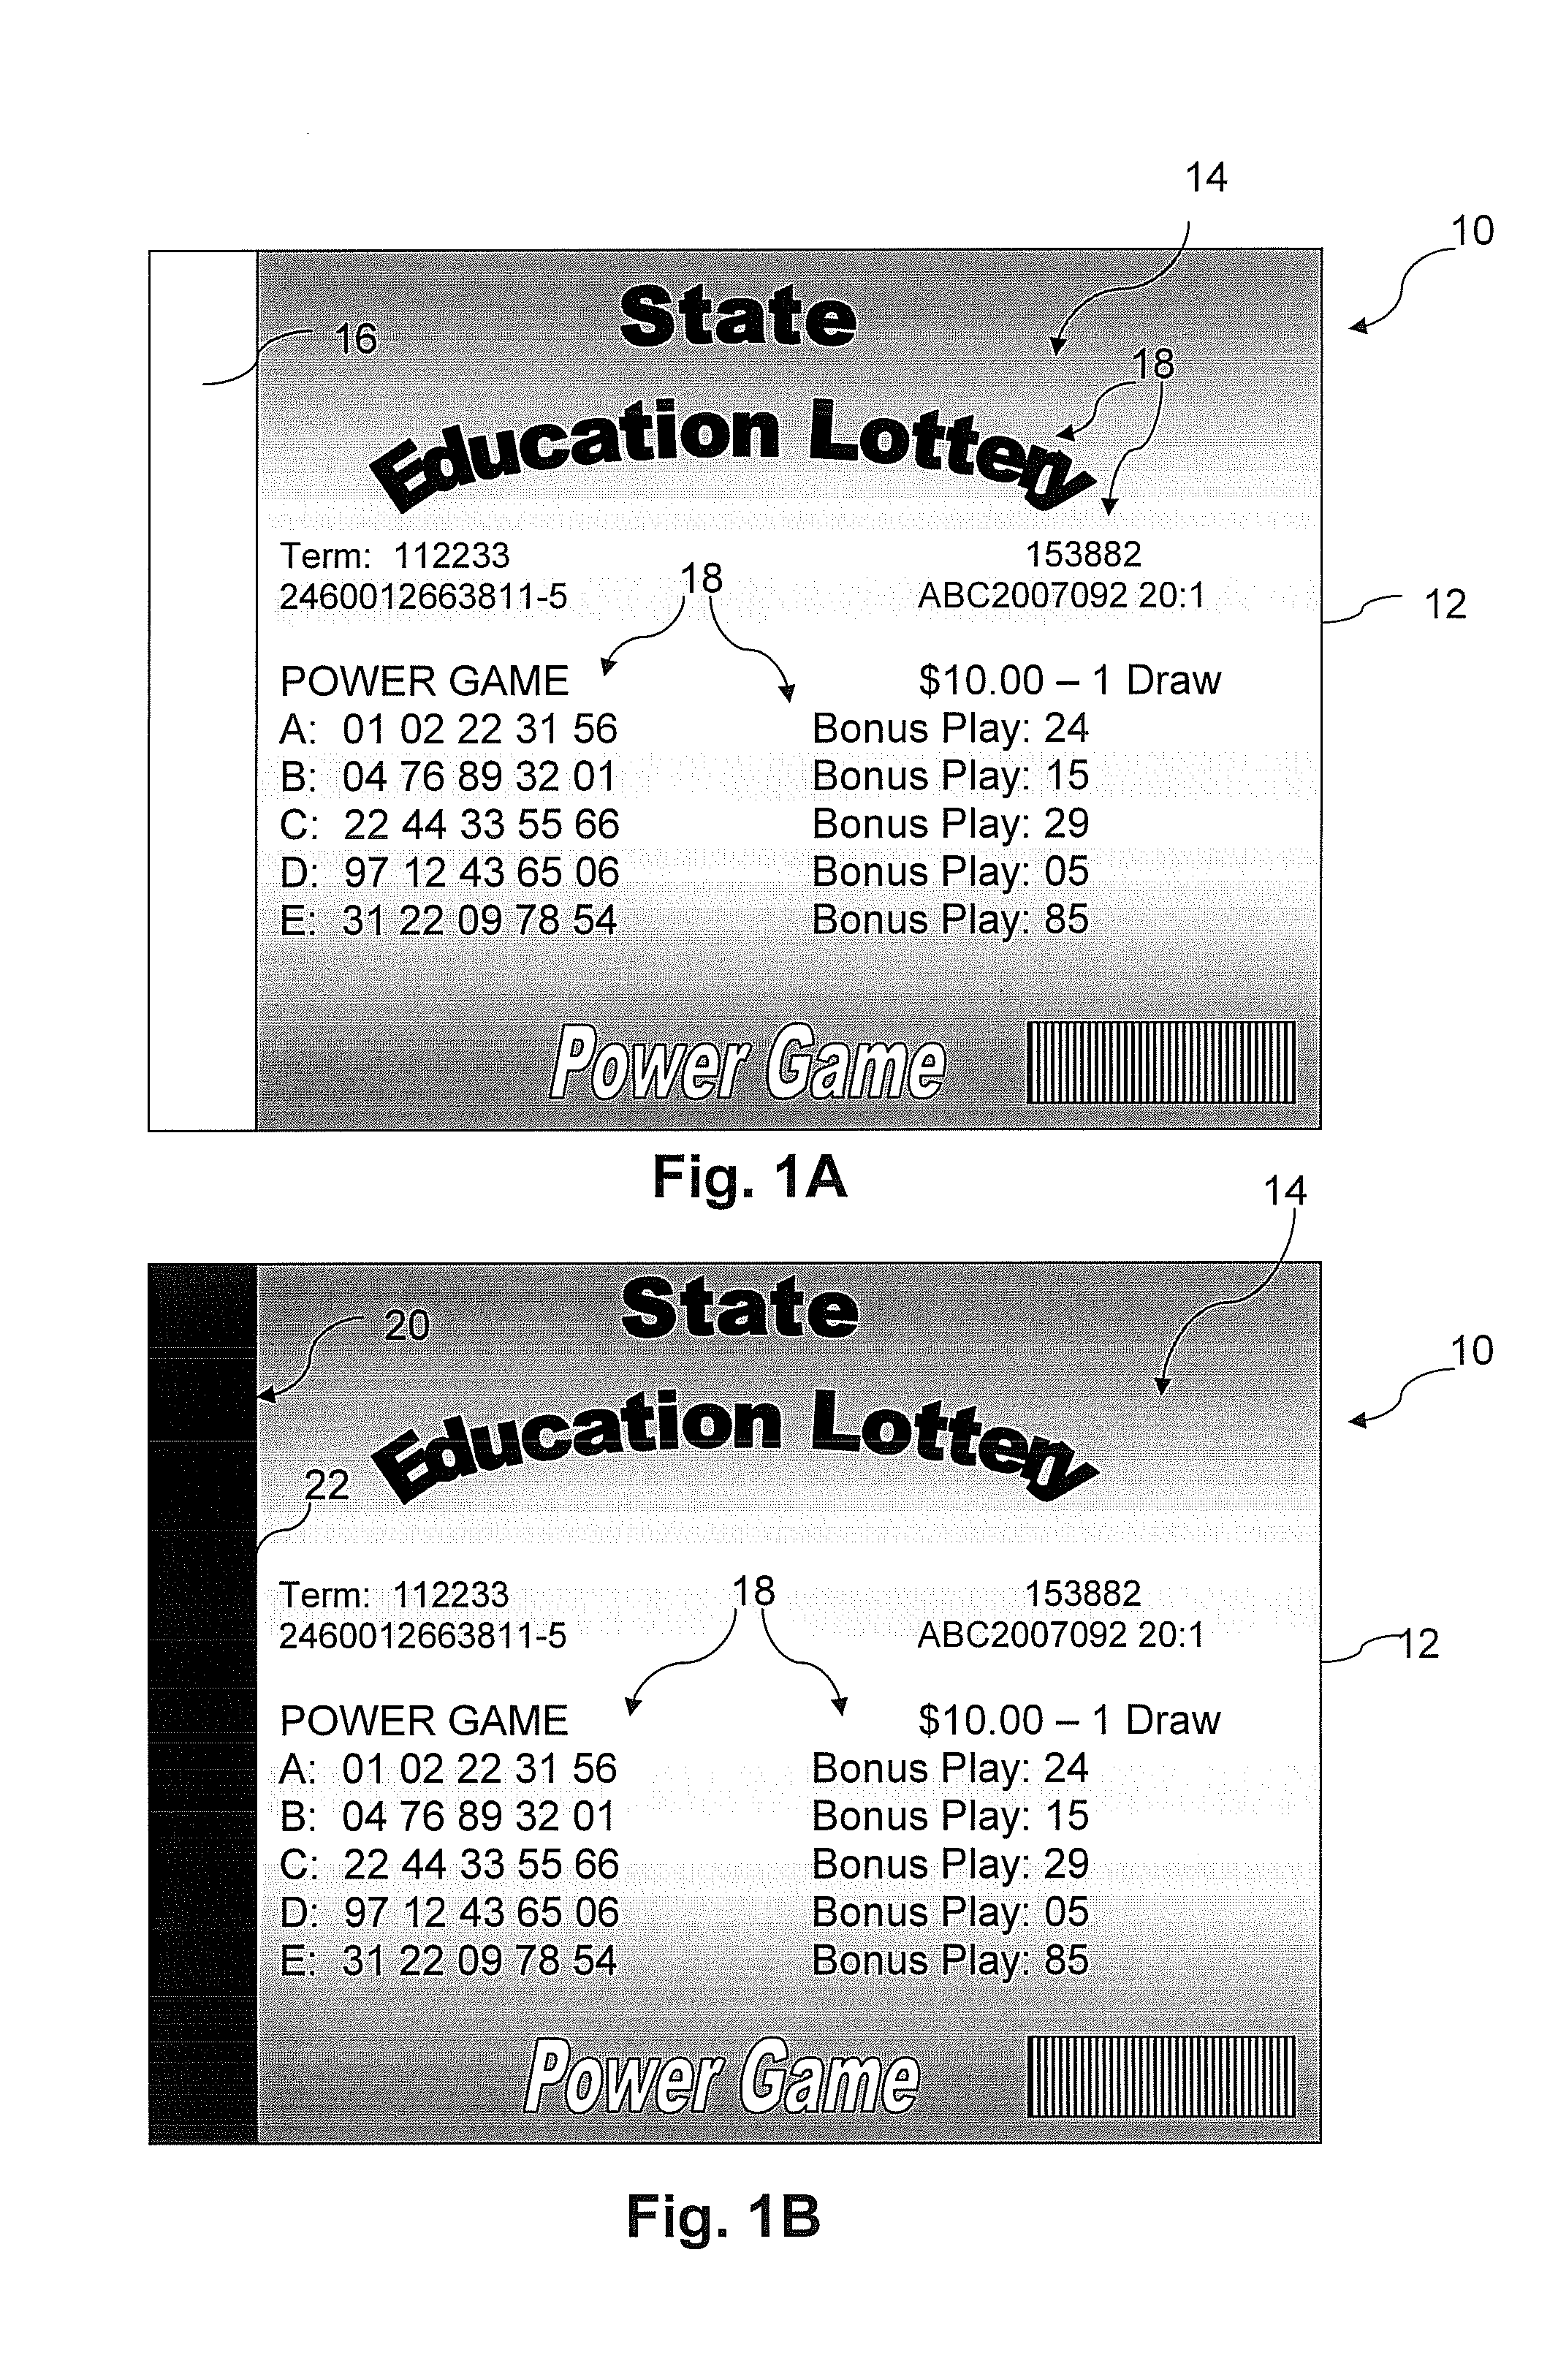 Method and System for Terminal Dispensed Lottery Ticket with Validation Mark